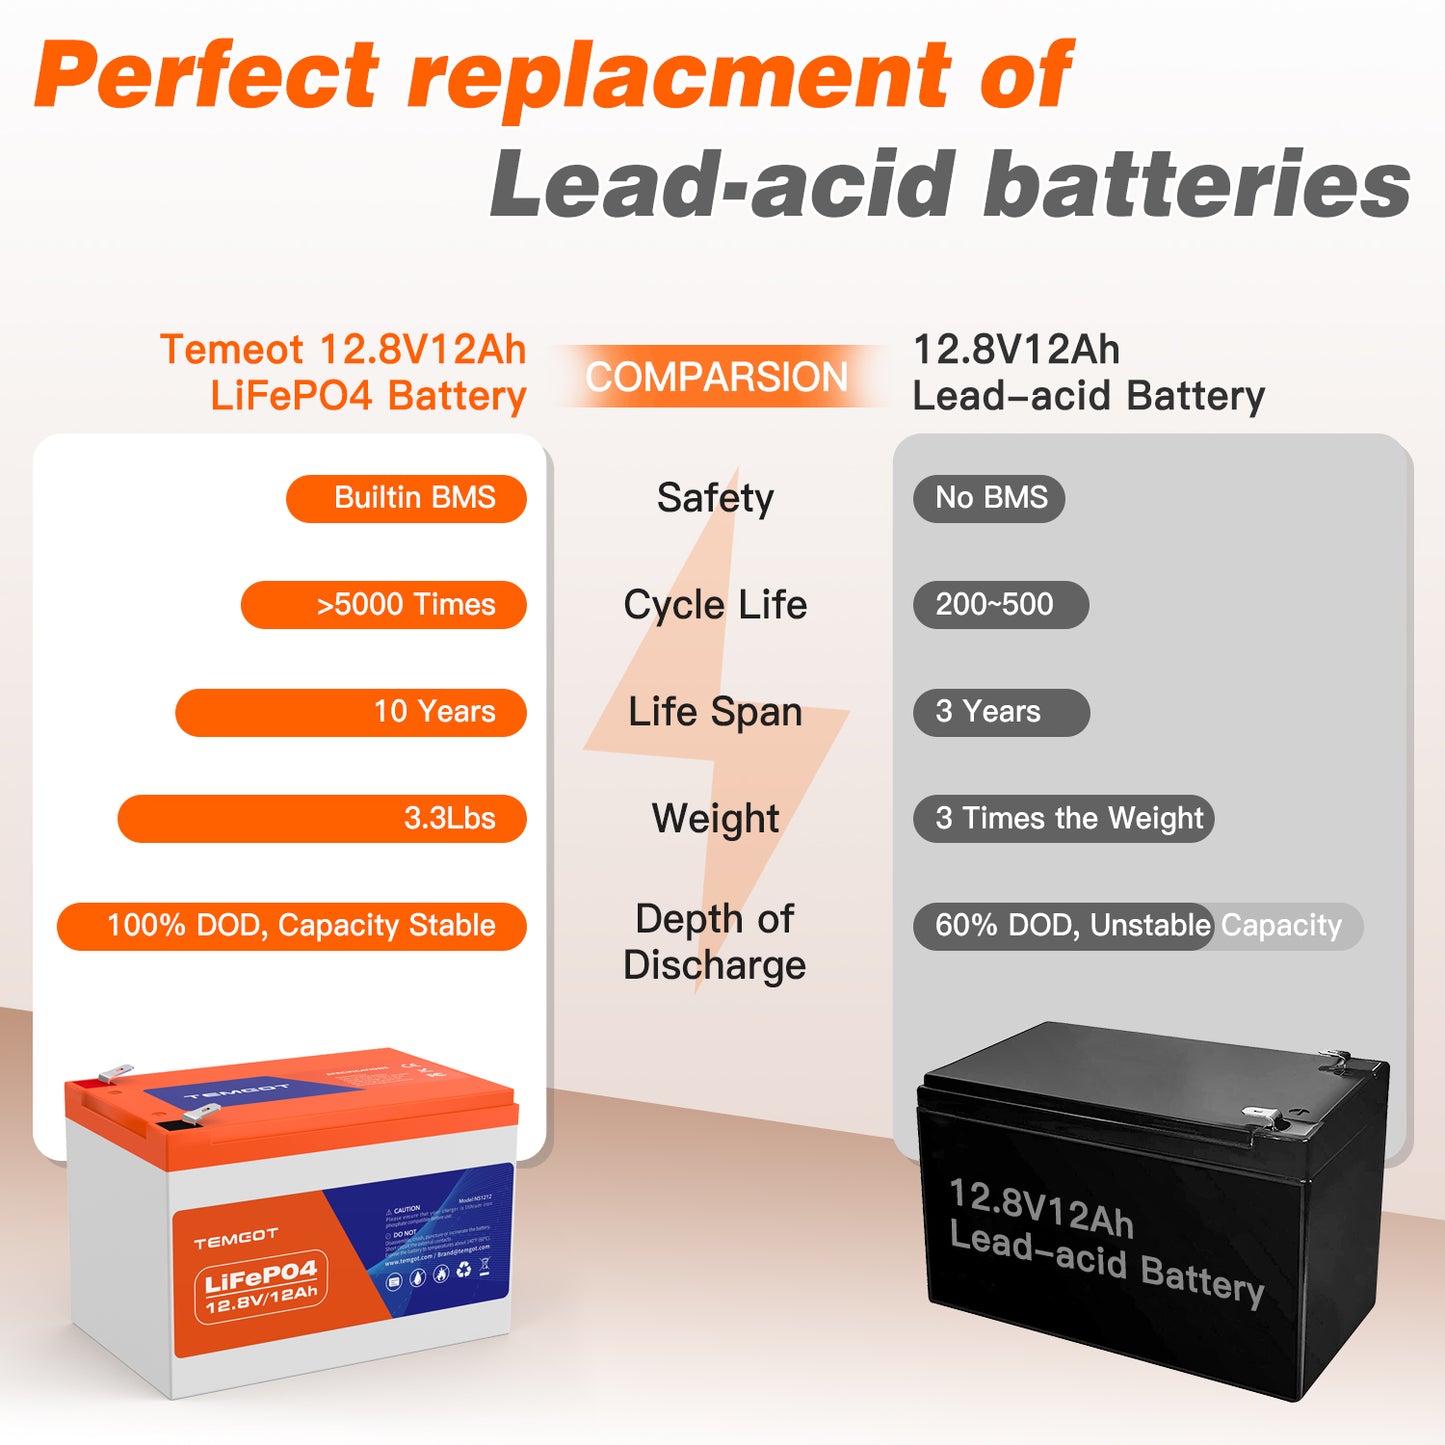 12.8V 12AH LiFePO4 Battery, Built-in 12A BMS, 5000+ Deep Cycle